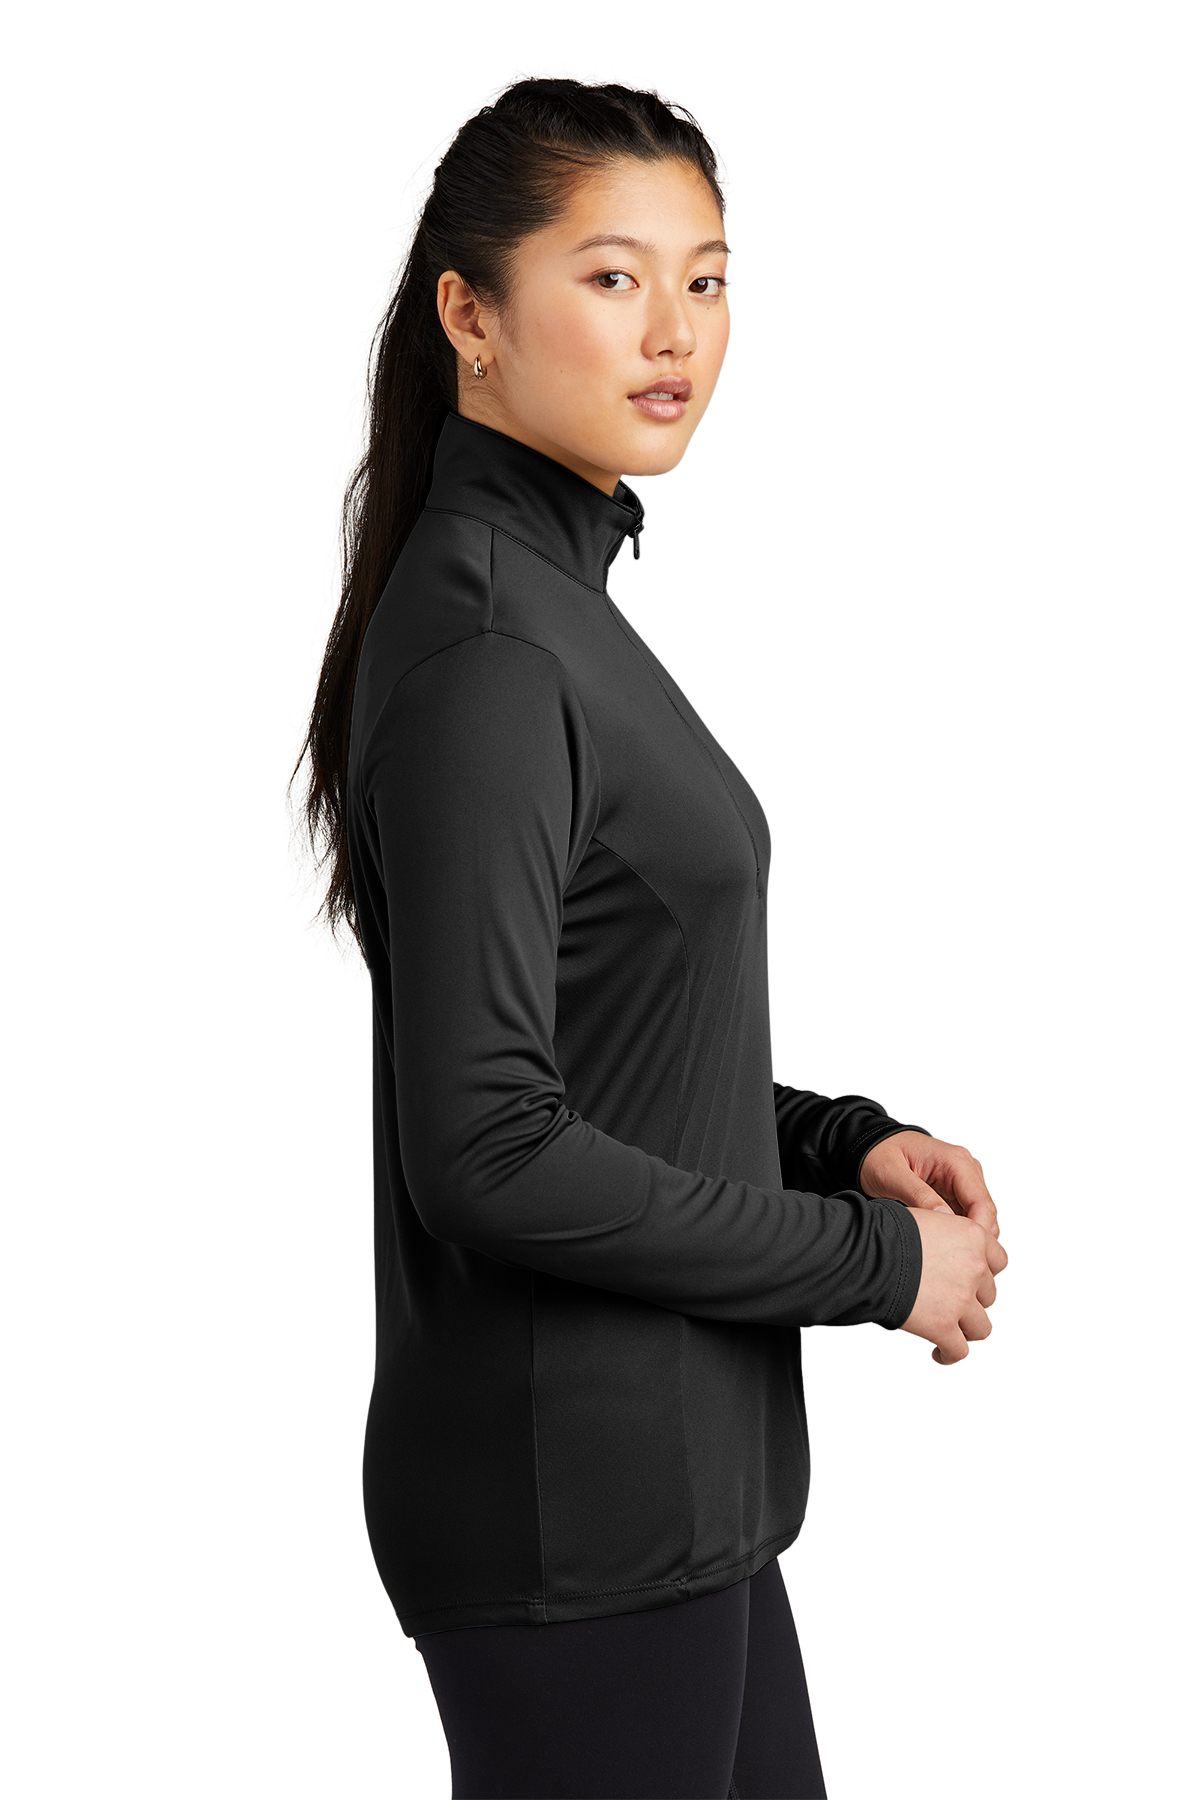 Sport-Tek Ladies PosiCharge Competitor™ 1/4-Zip Pullover, Product